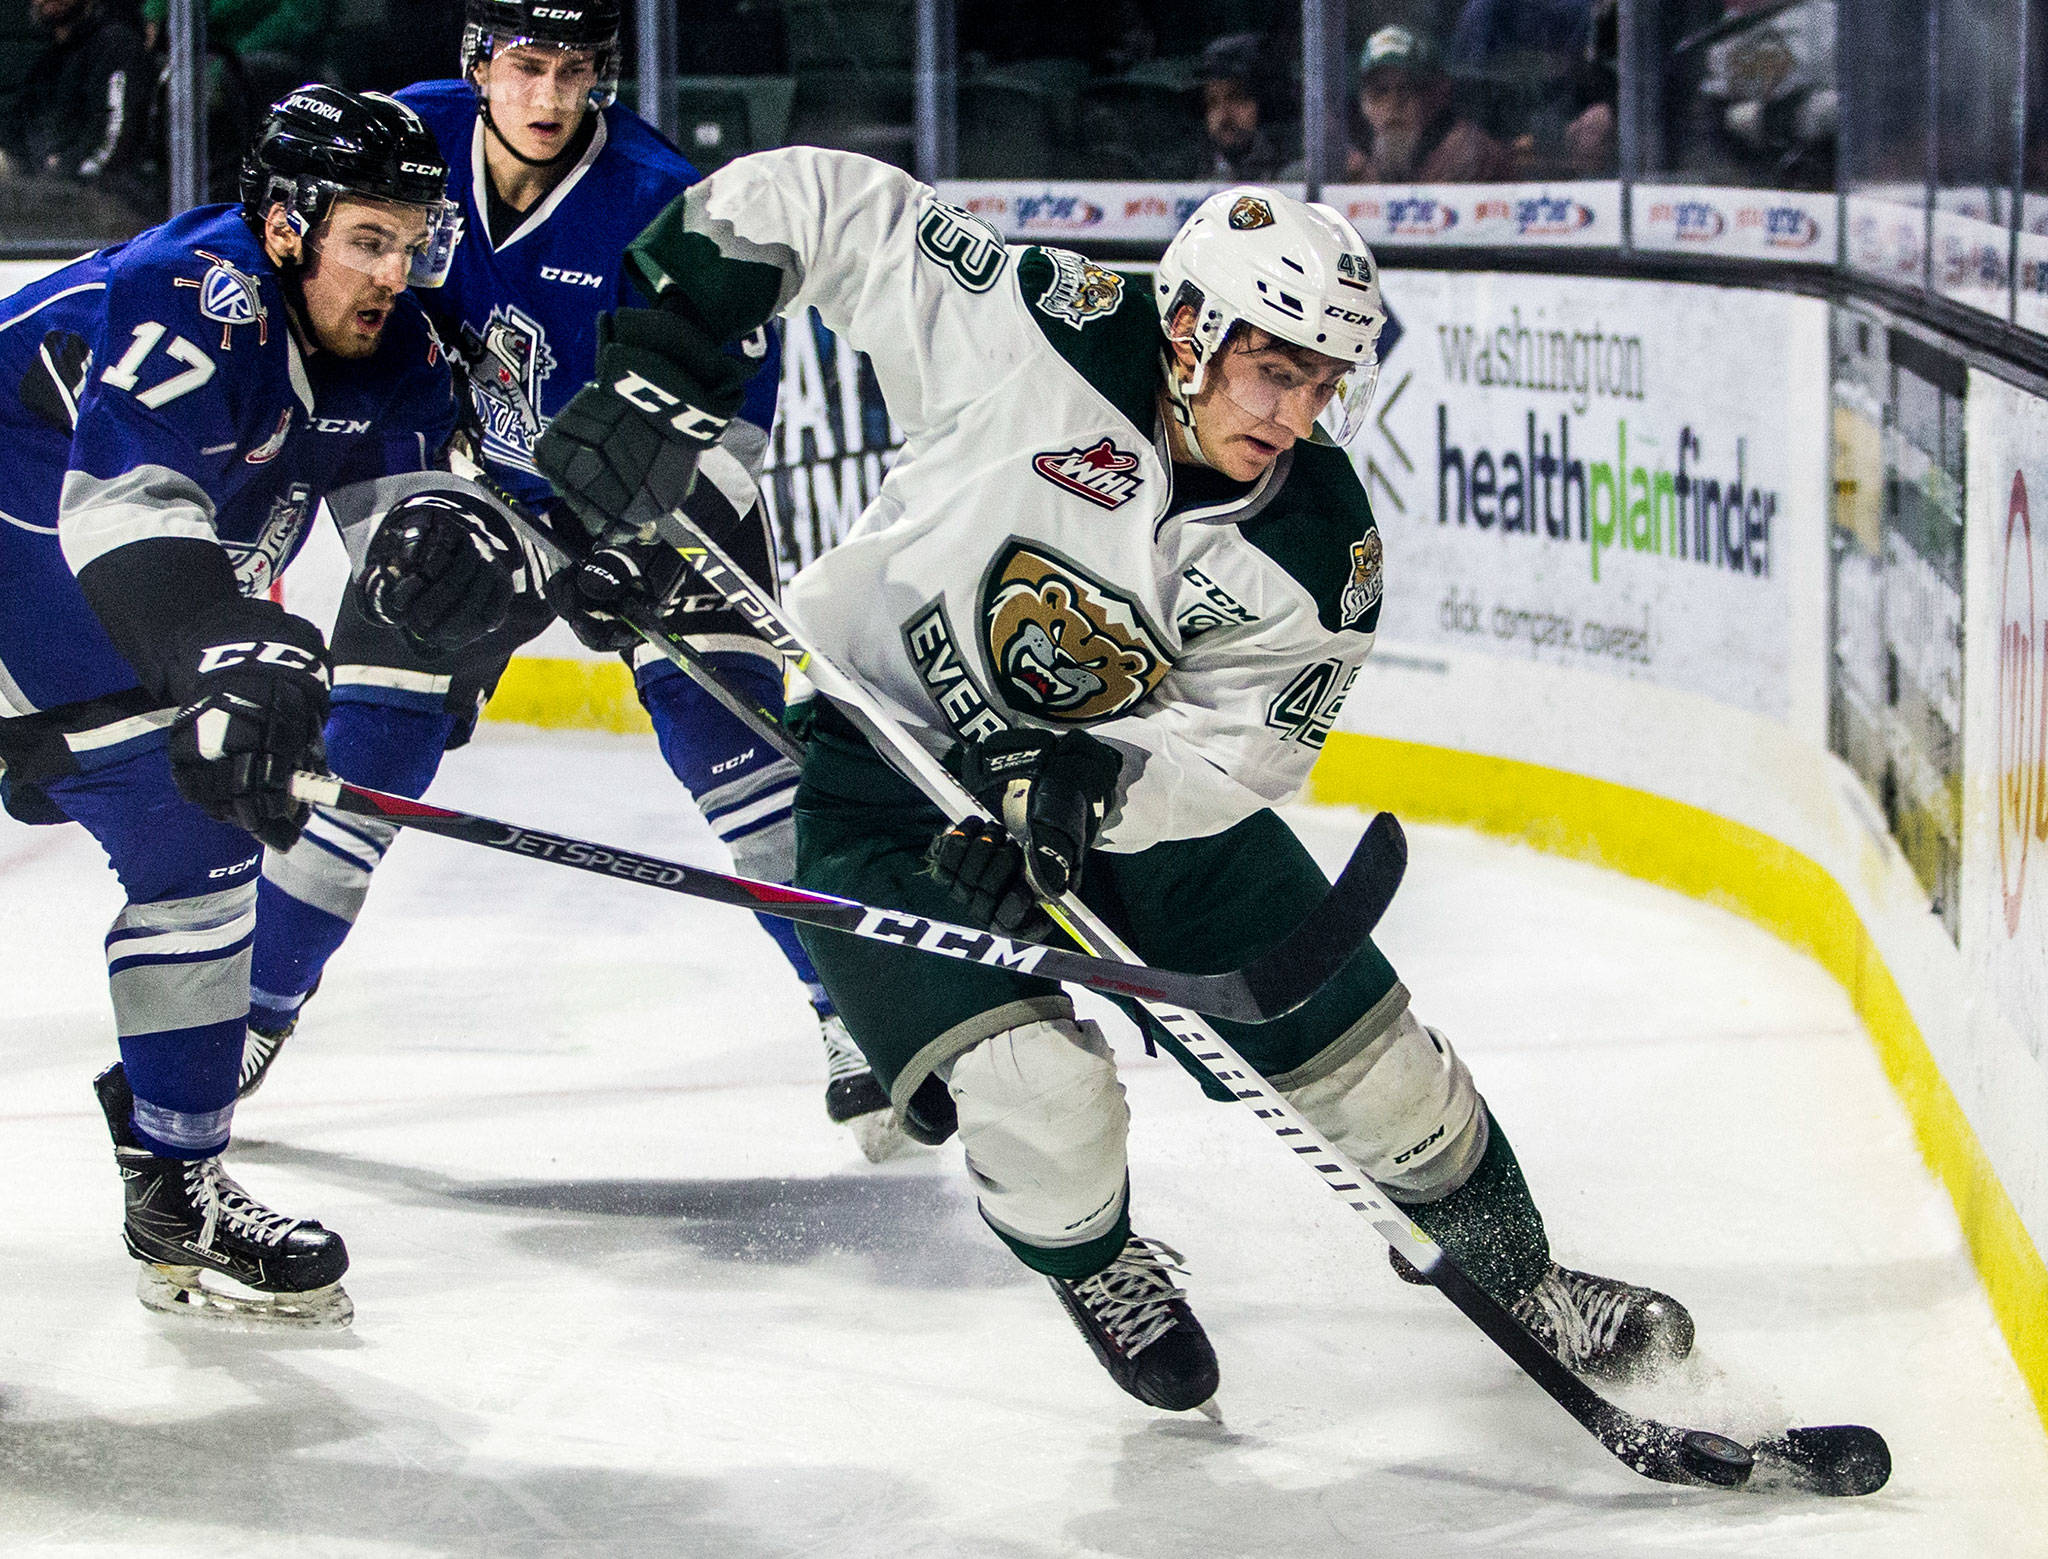 Silvertips’ Connor Dewar skates behind the goal with the puck during the game against the Victoria Royals on Sunday, Jan. 20, in Everett. (Olivia Vanni / The Herald)